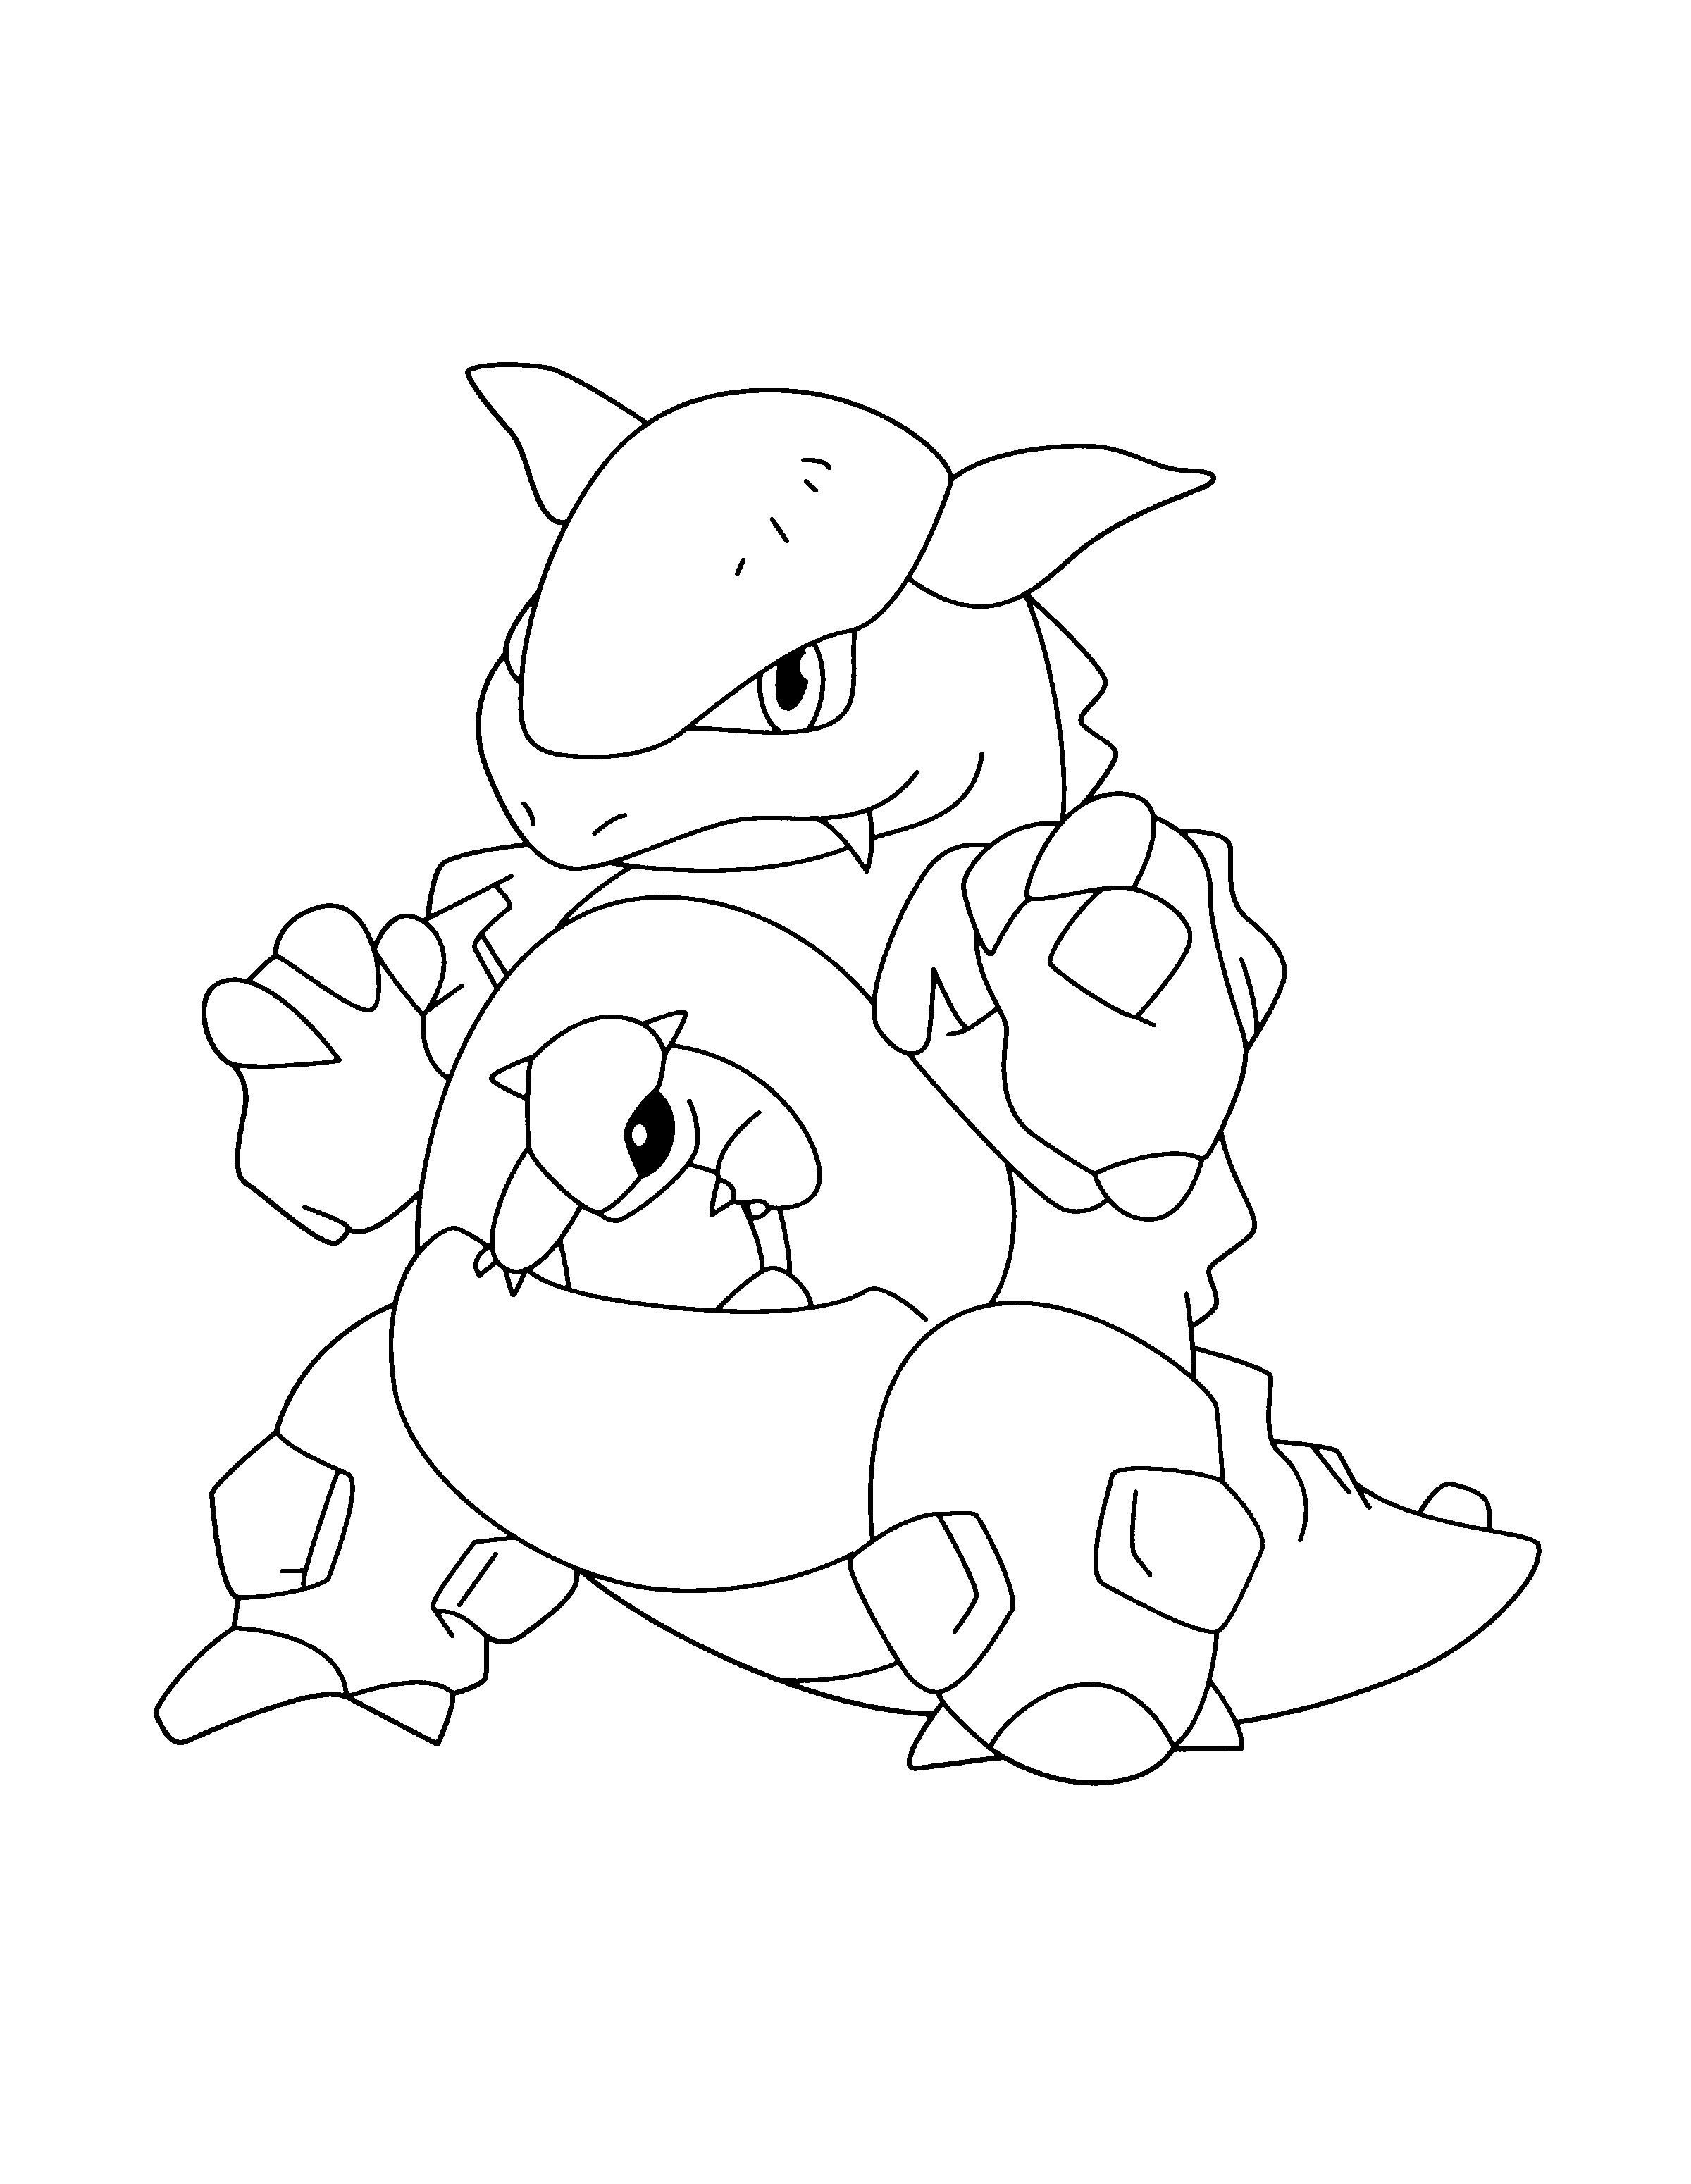 animated-coloring-pages-pokemon-image-0156